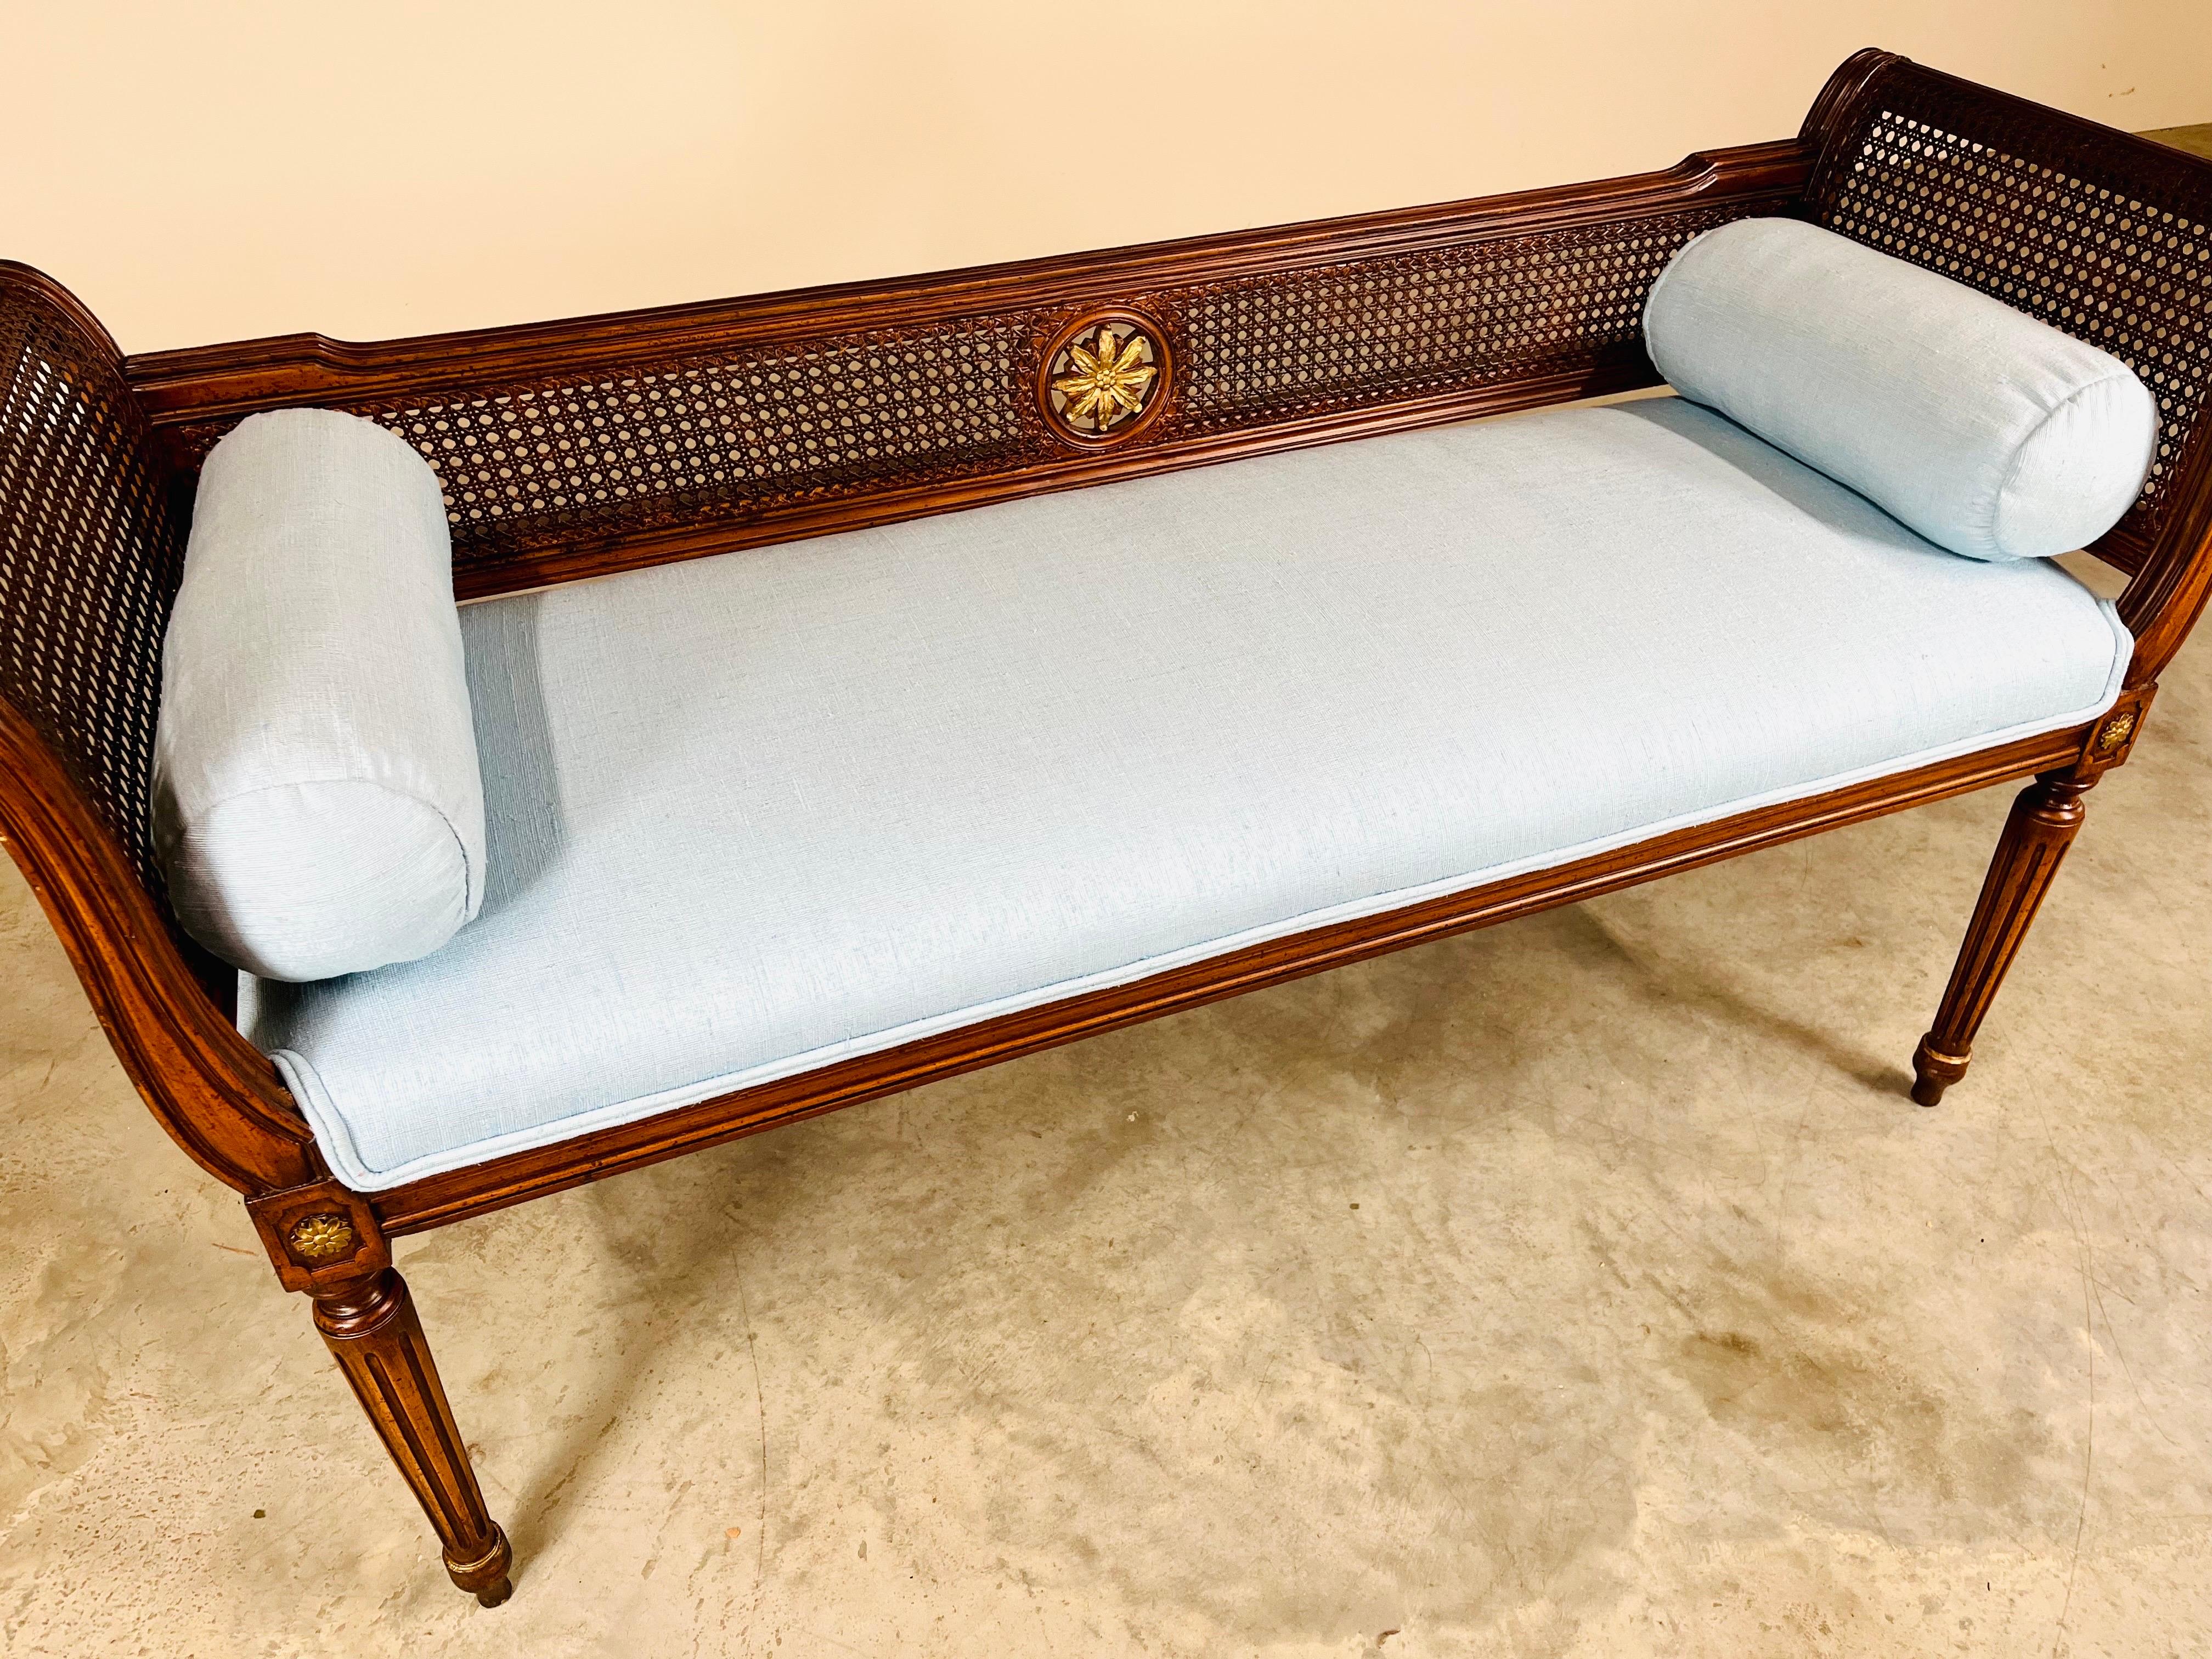 Louis XVI caned mahogany scroll arm window bench embellished with gold gilt rosettes, newly upholstered in new old stock blue silk with fresh cushioning. 
Excellent vintage condition having perfect cane throughout. Clean and ready for use!